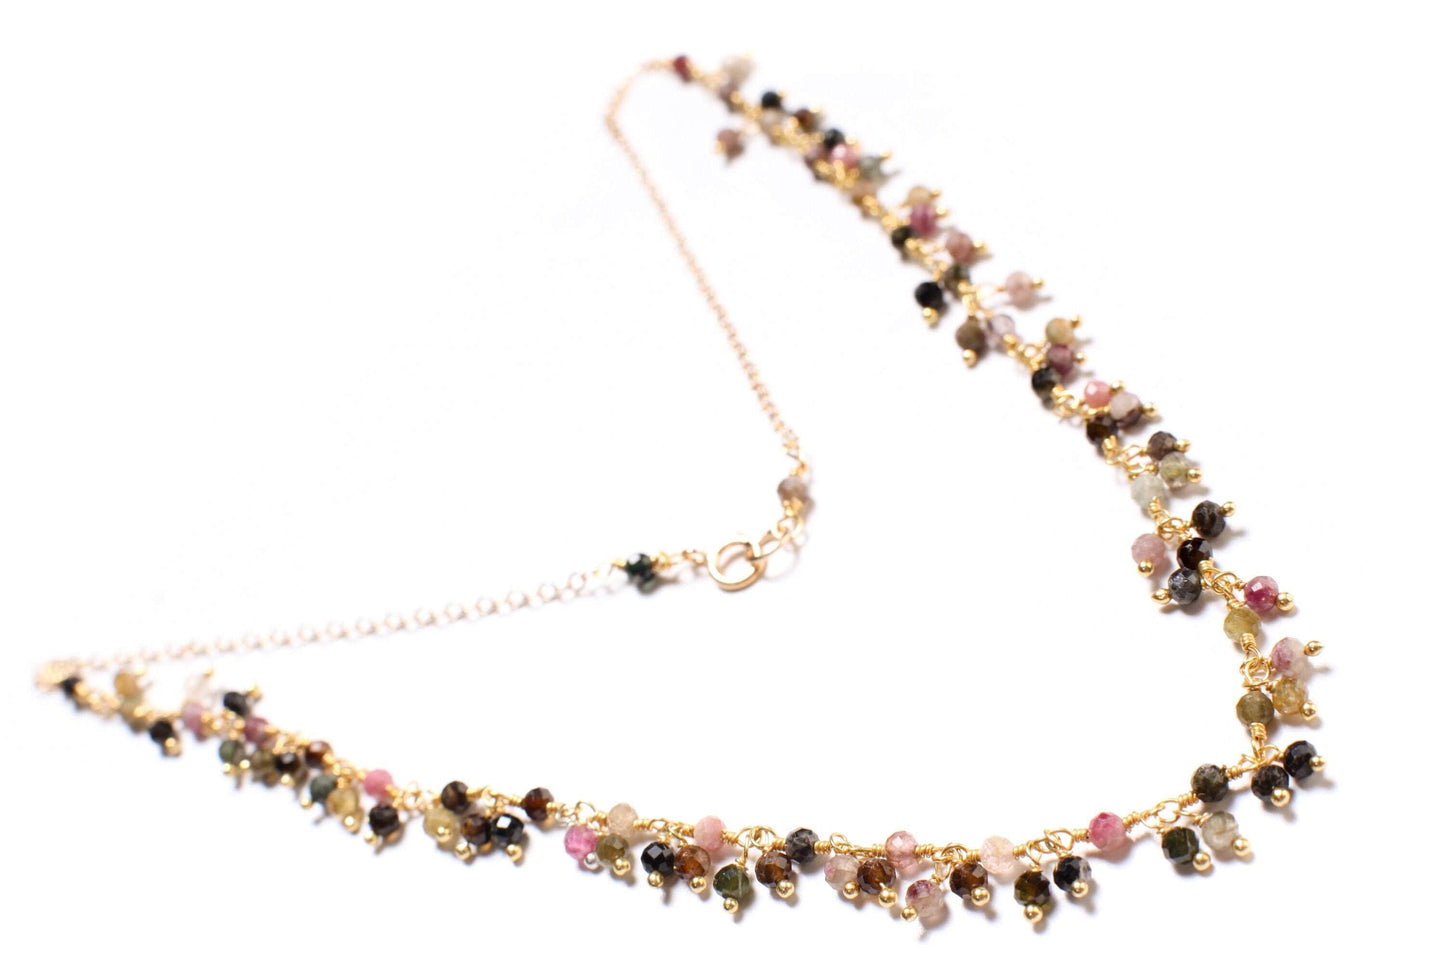 Genuine Watermelon multi Tourmaline Wire Wrapped Clusters Necklace in 14K Gold Filled Chain, Clasp, Valentine Gift